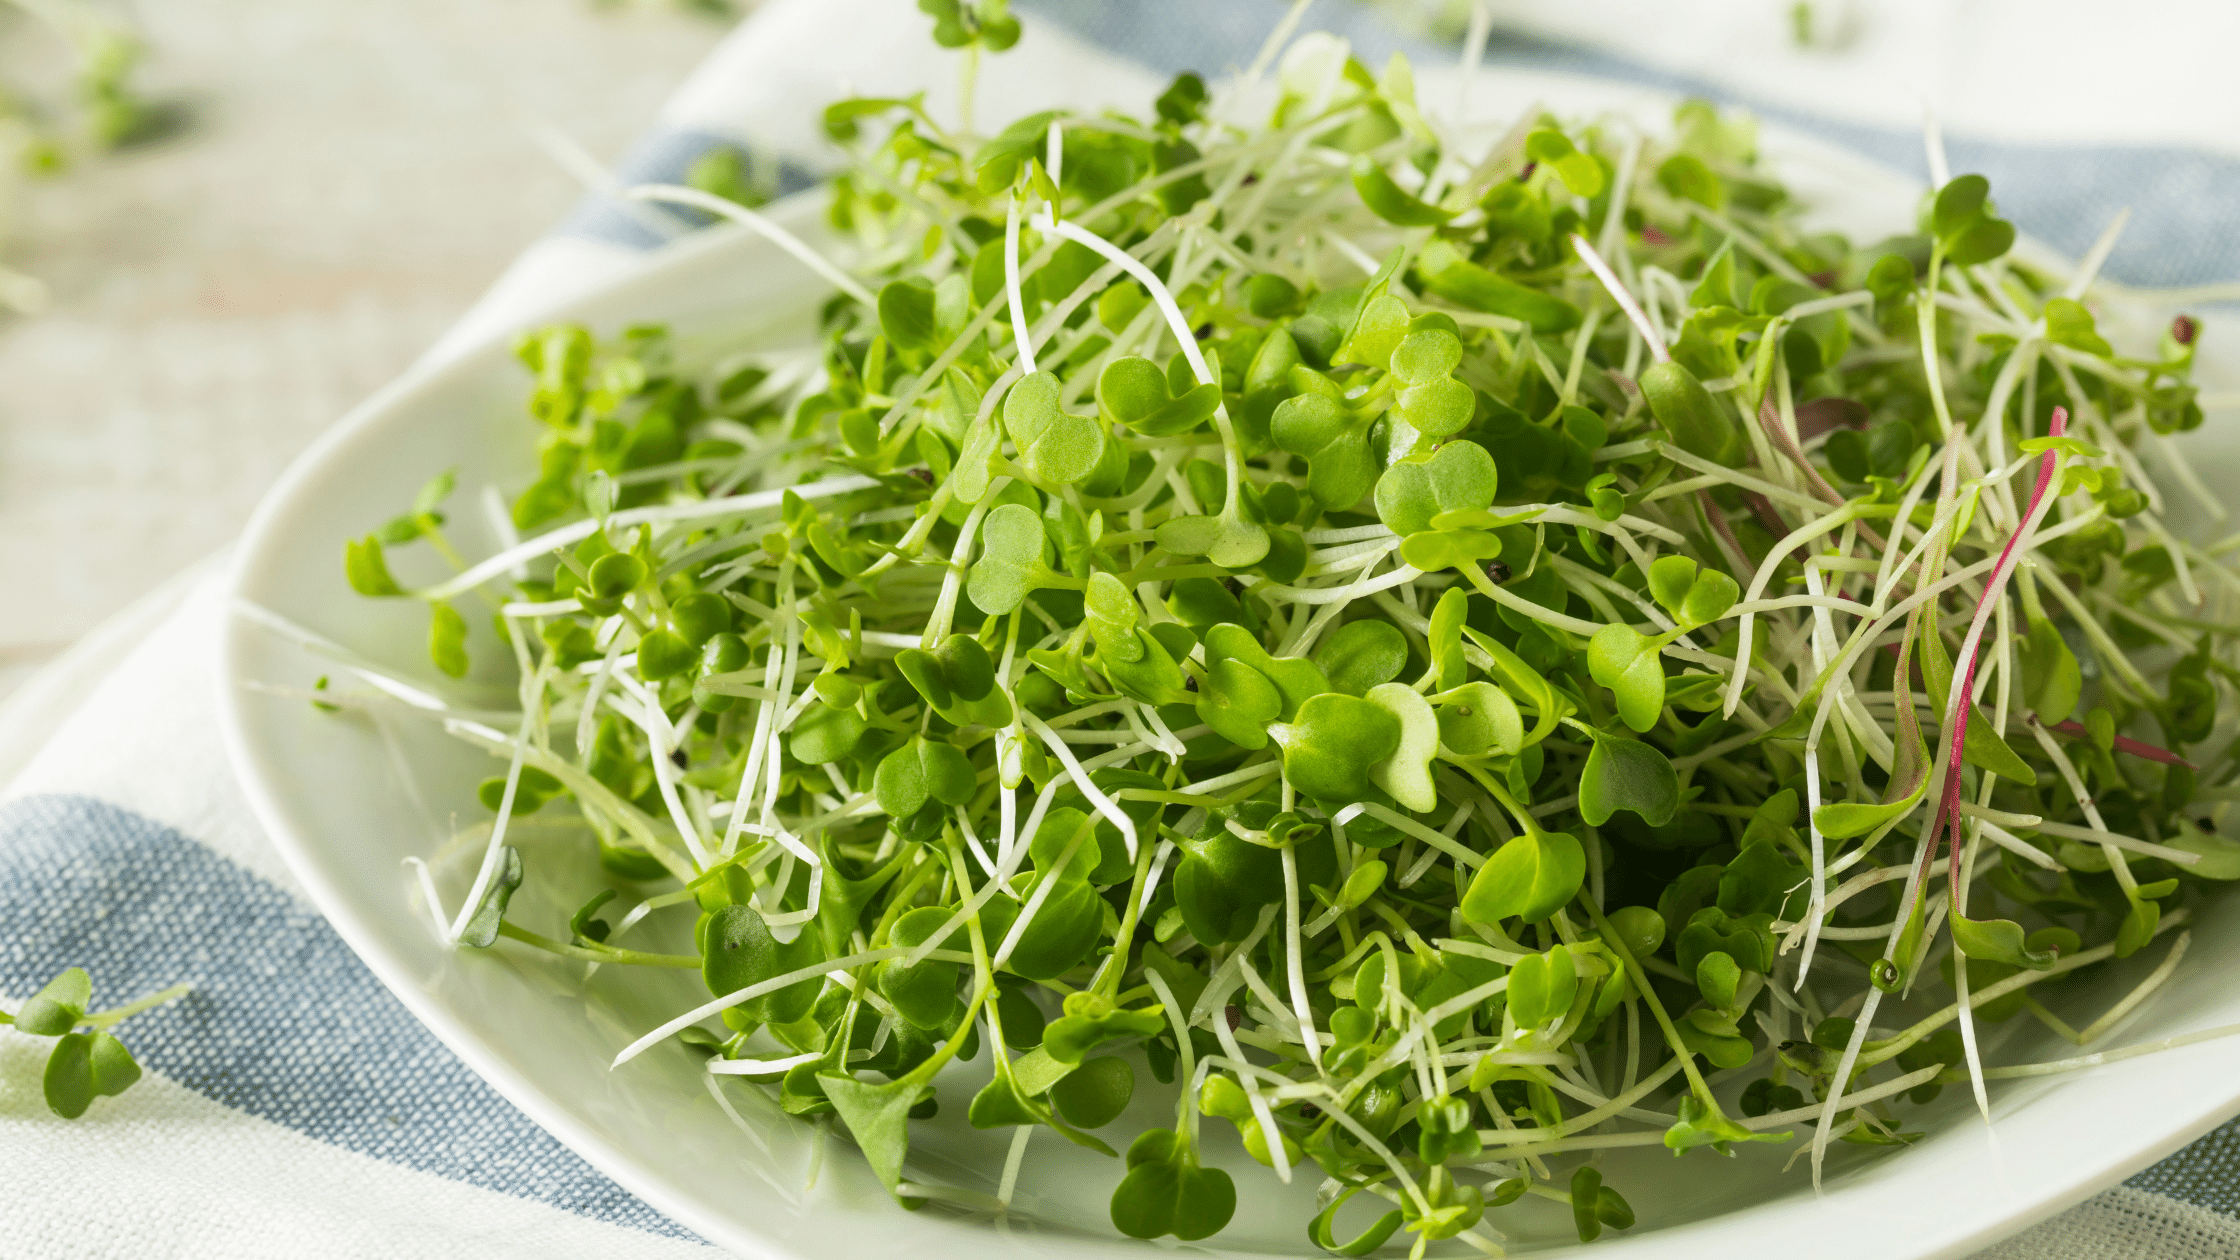 How to Grow Microgreens that are Nutritious